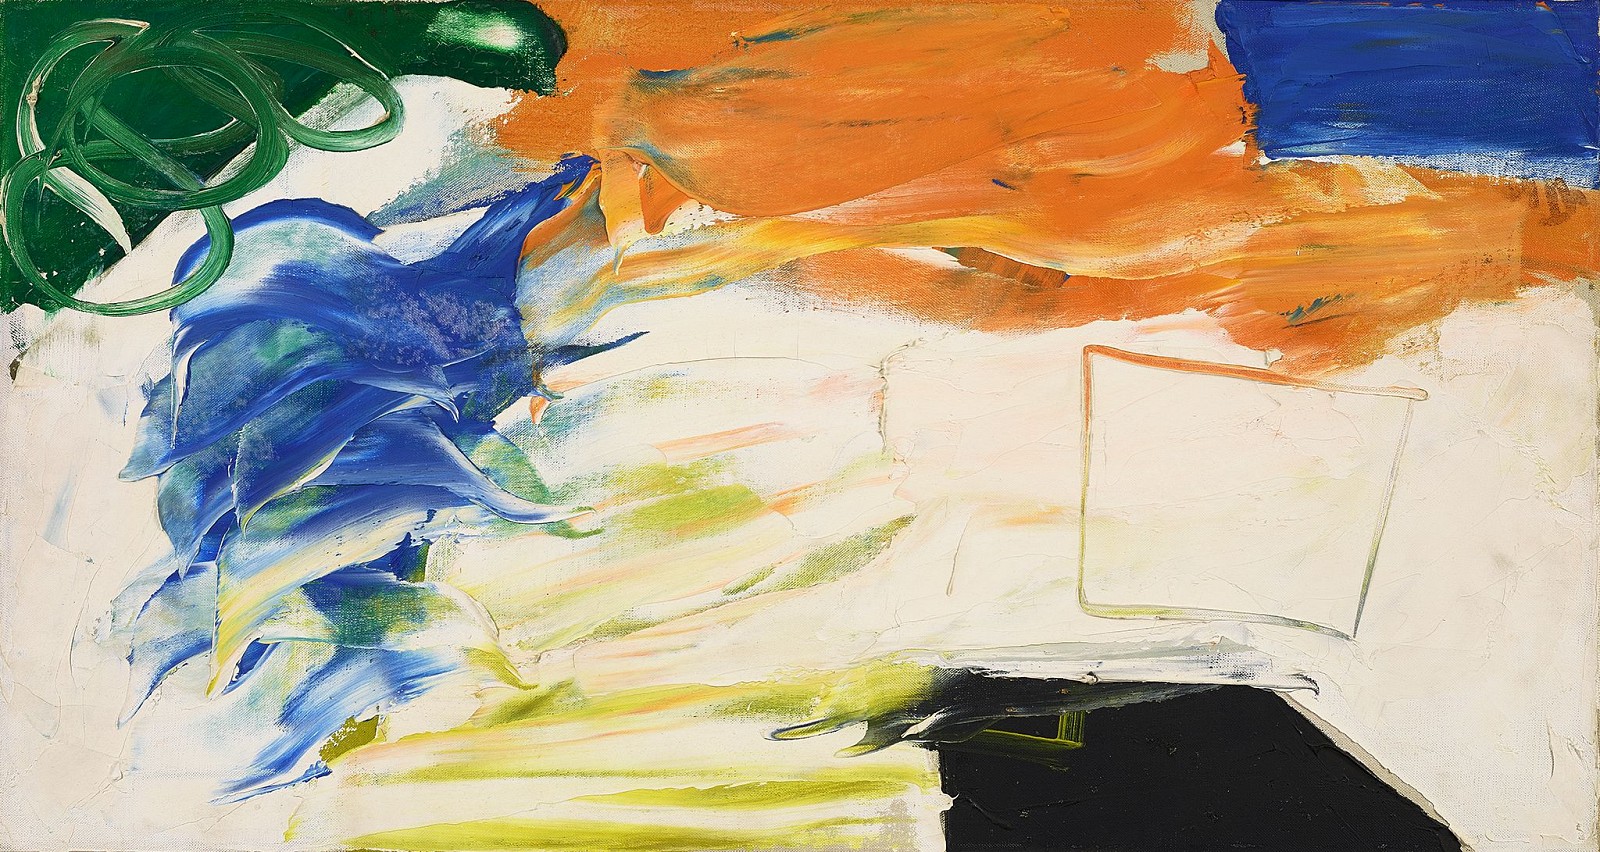 Yvonne Thomas, The Ardent One | SOLD, 1960
Oil on canvas, 16 x 30 in. (40.6 x 76.2 cm)
SOLD
THO-00039